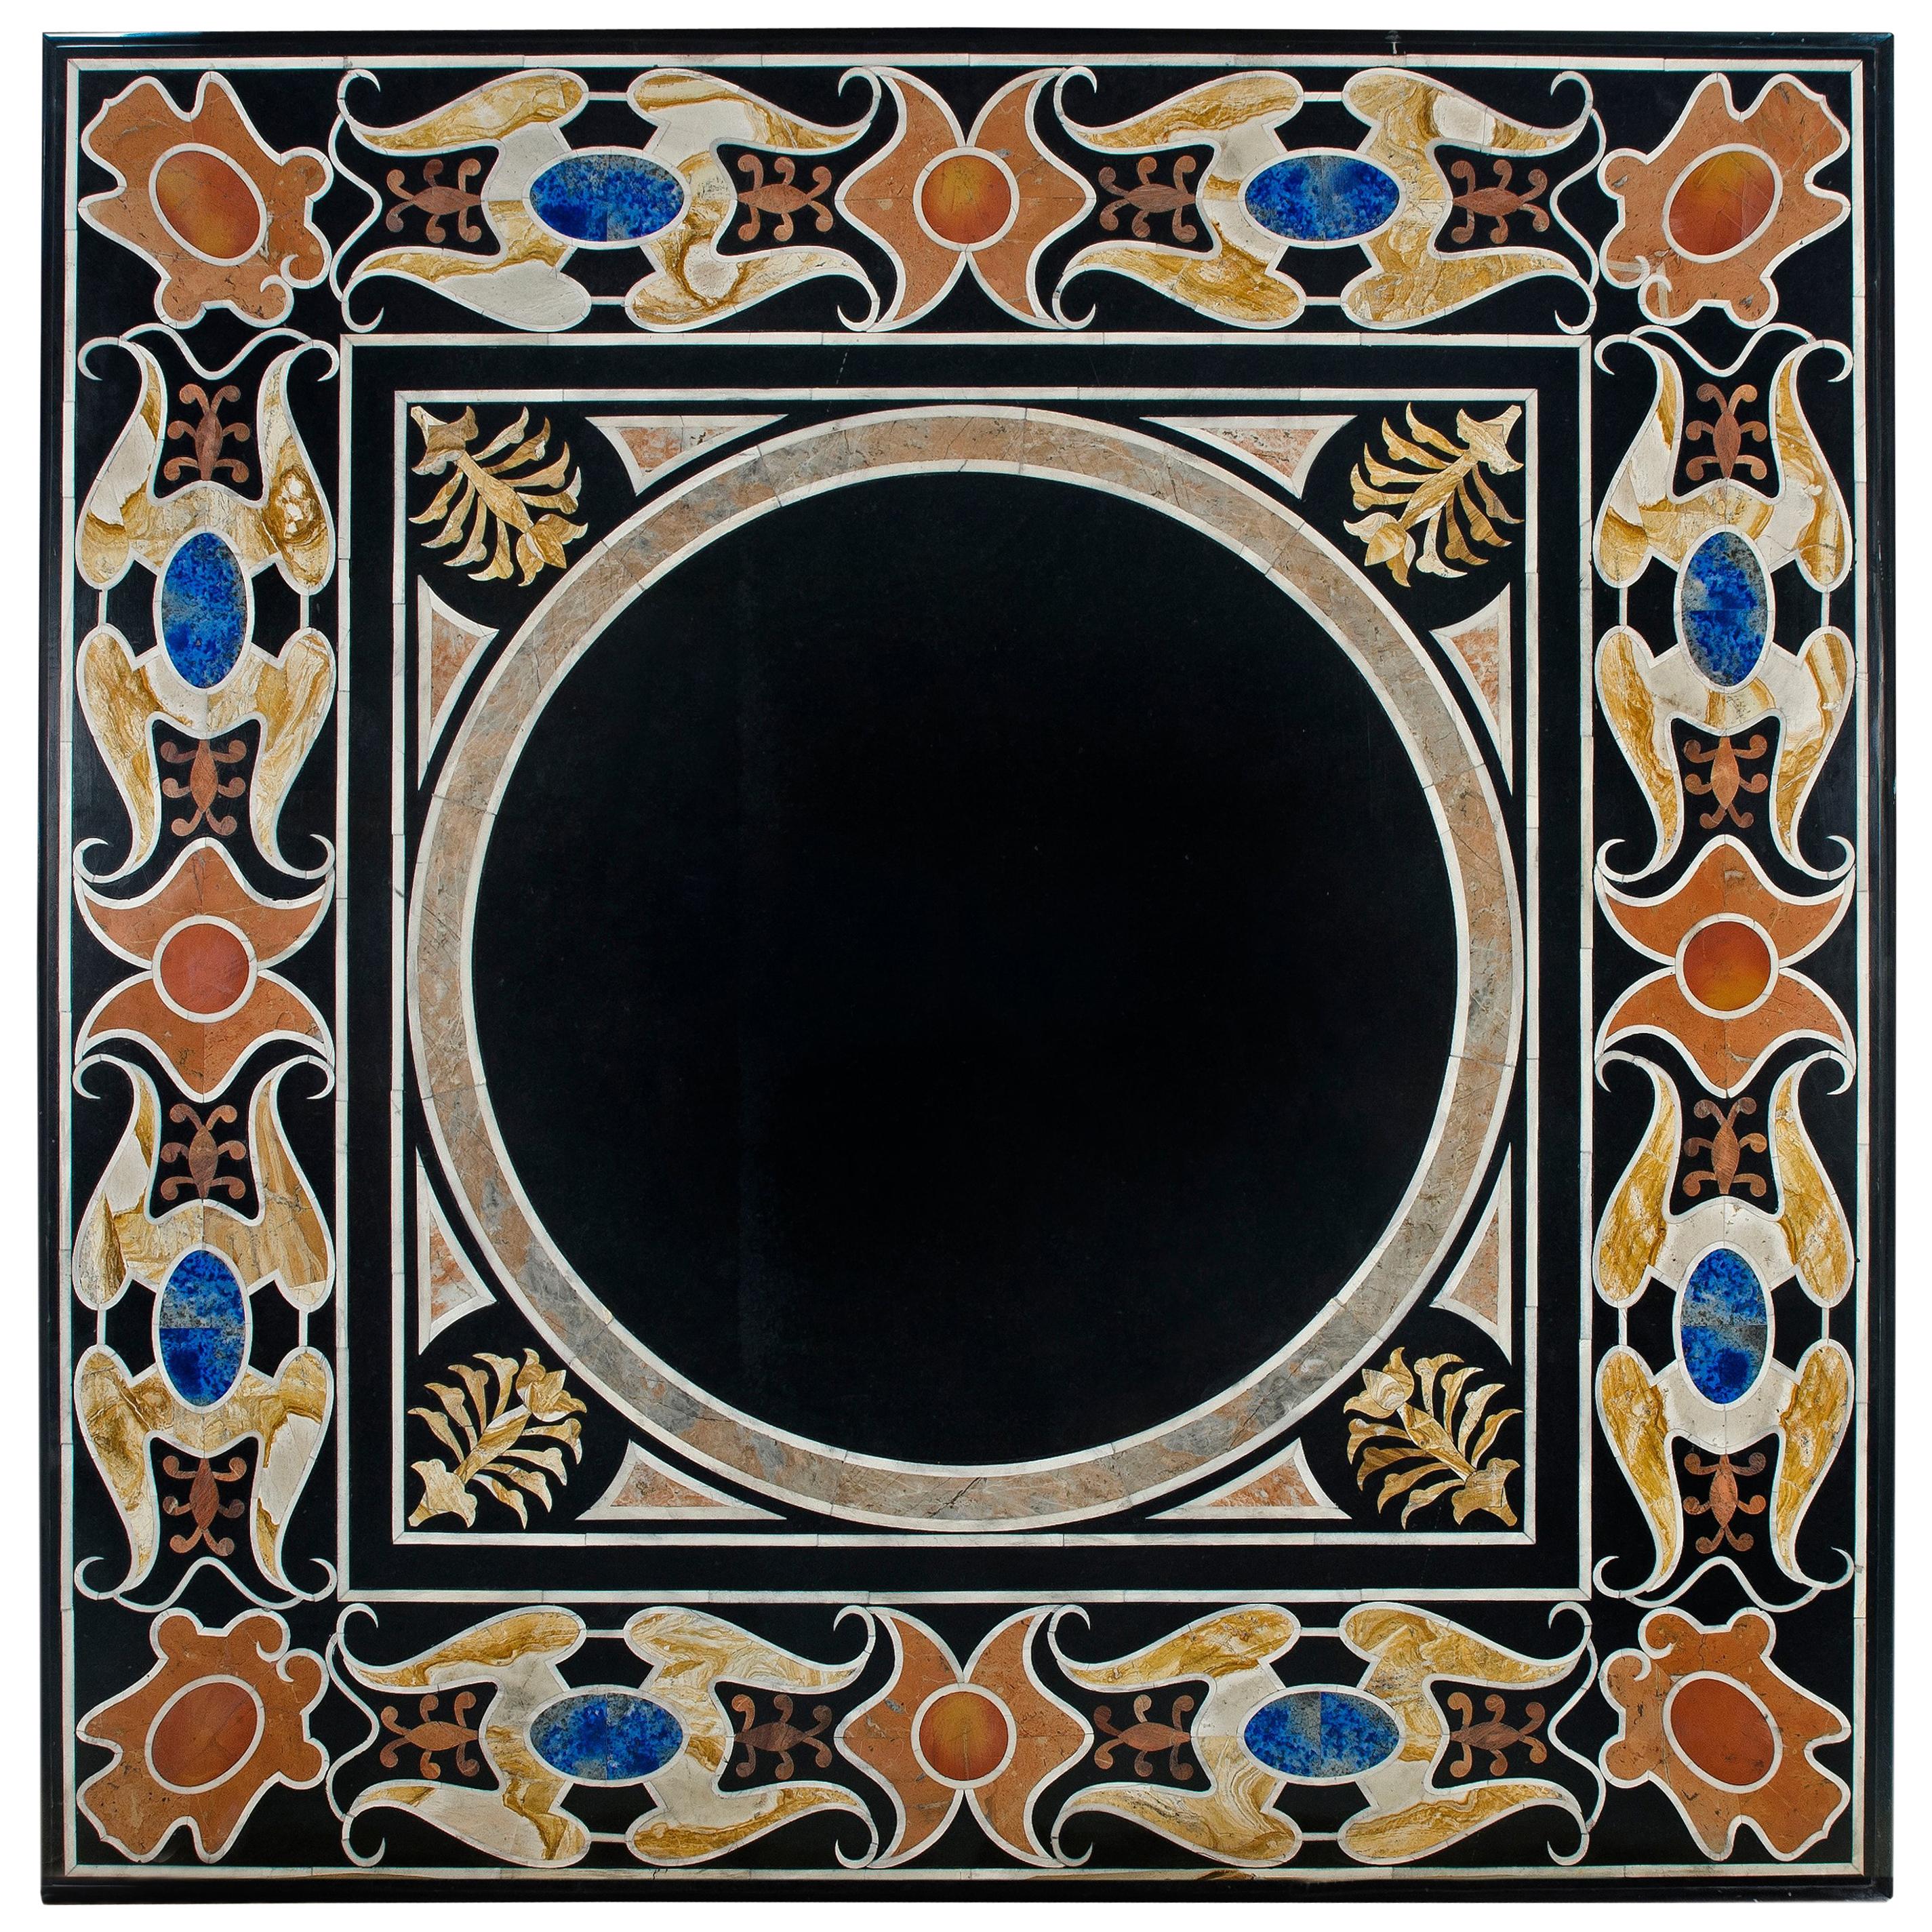 Pietra Dura Tabletop, Marble and Hardstones, Late 20th Century